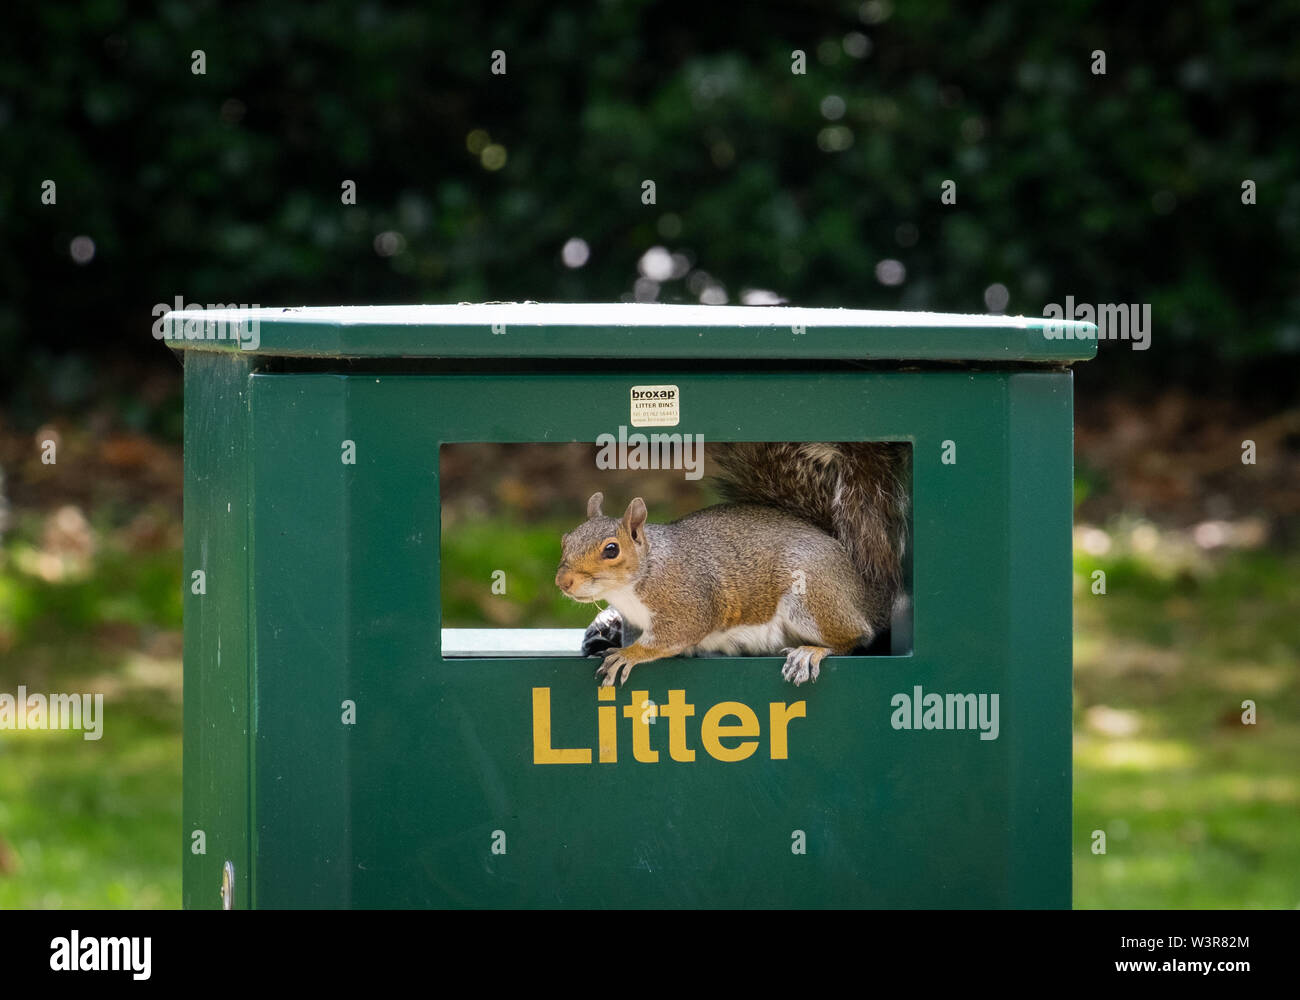 A grey squirrel looking for food in a rubbish litter bin Stock Photo